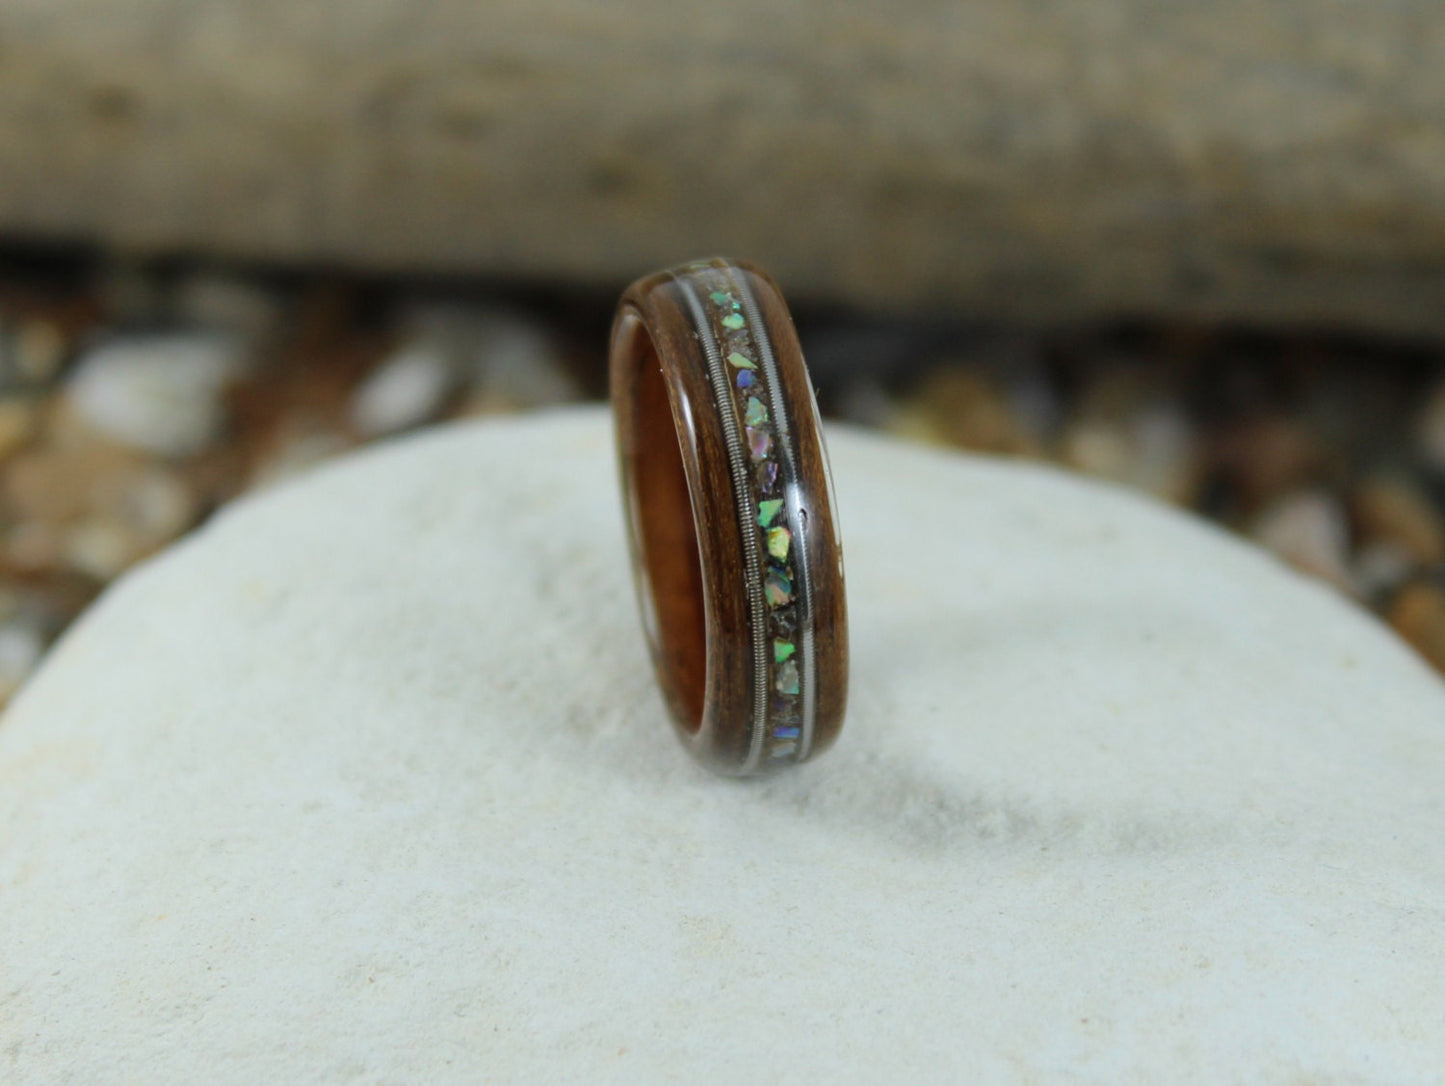 Kingwood & Olive Bent Wood Ring With Abalone + Guitar Strings